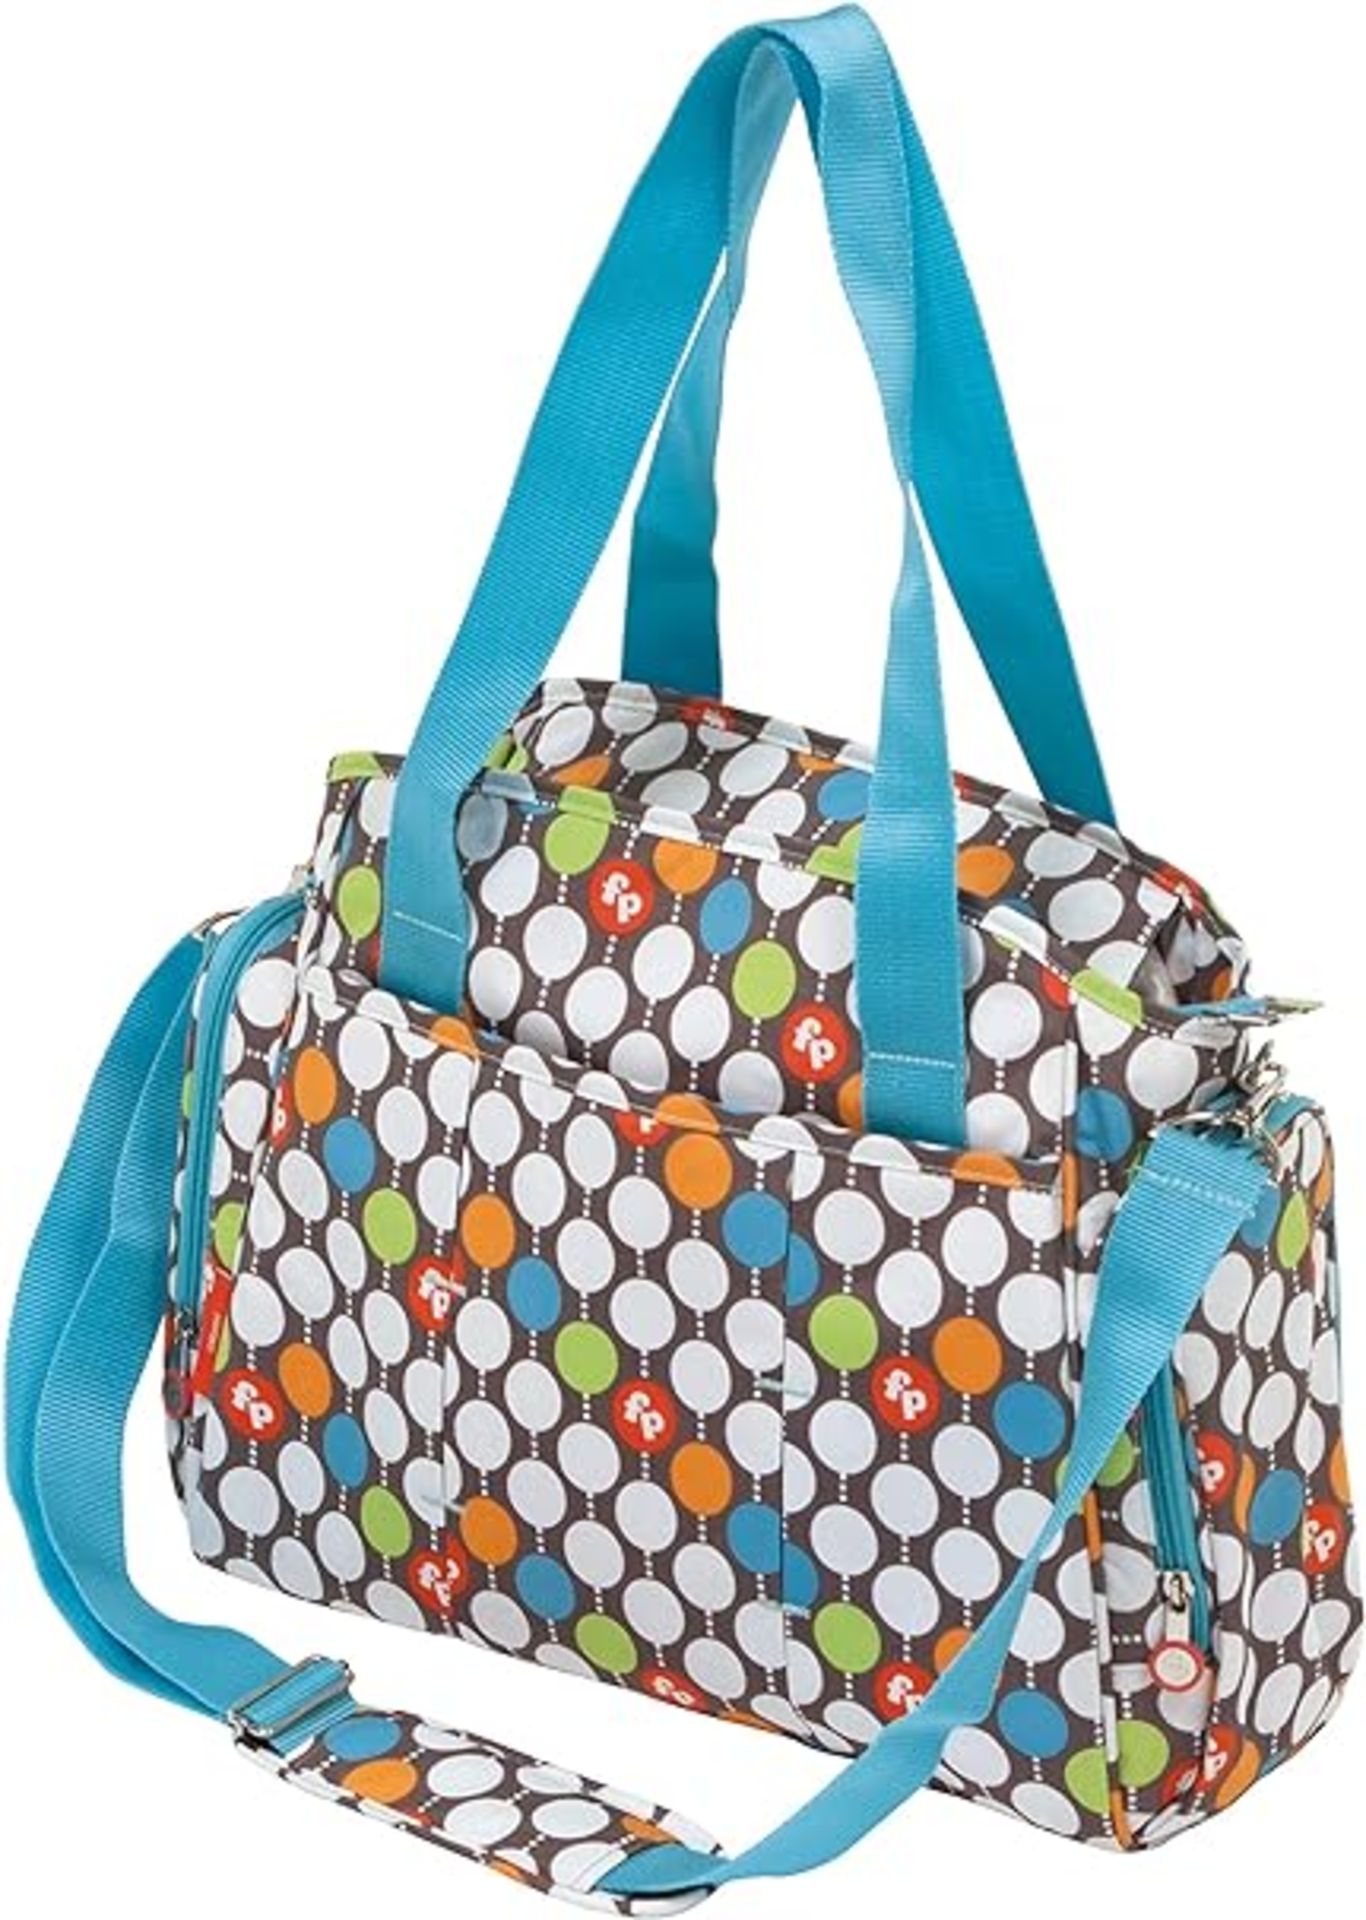 10 X NEW FISHER PRICE BABY BAG+ACC 37X17X32.5 DOTS